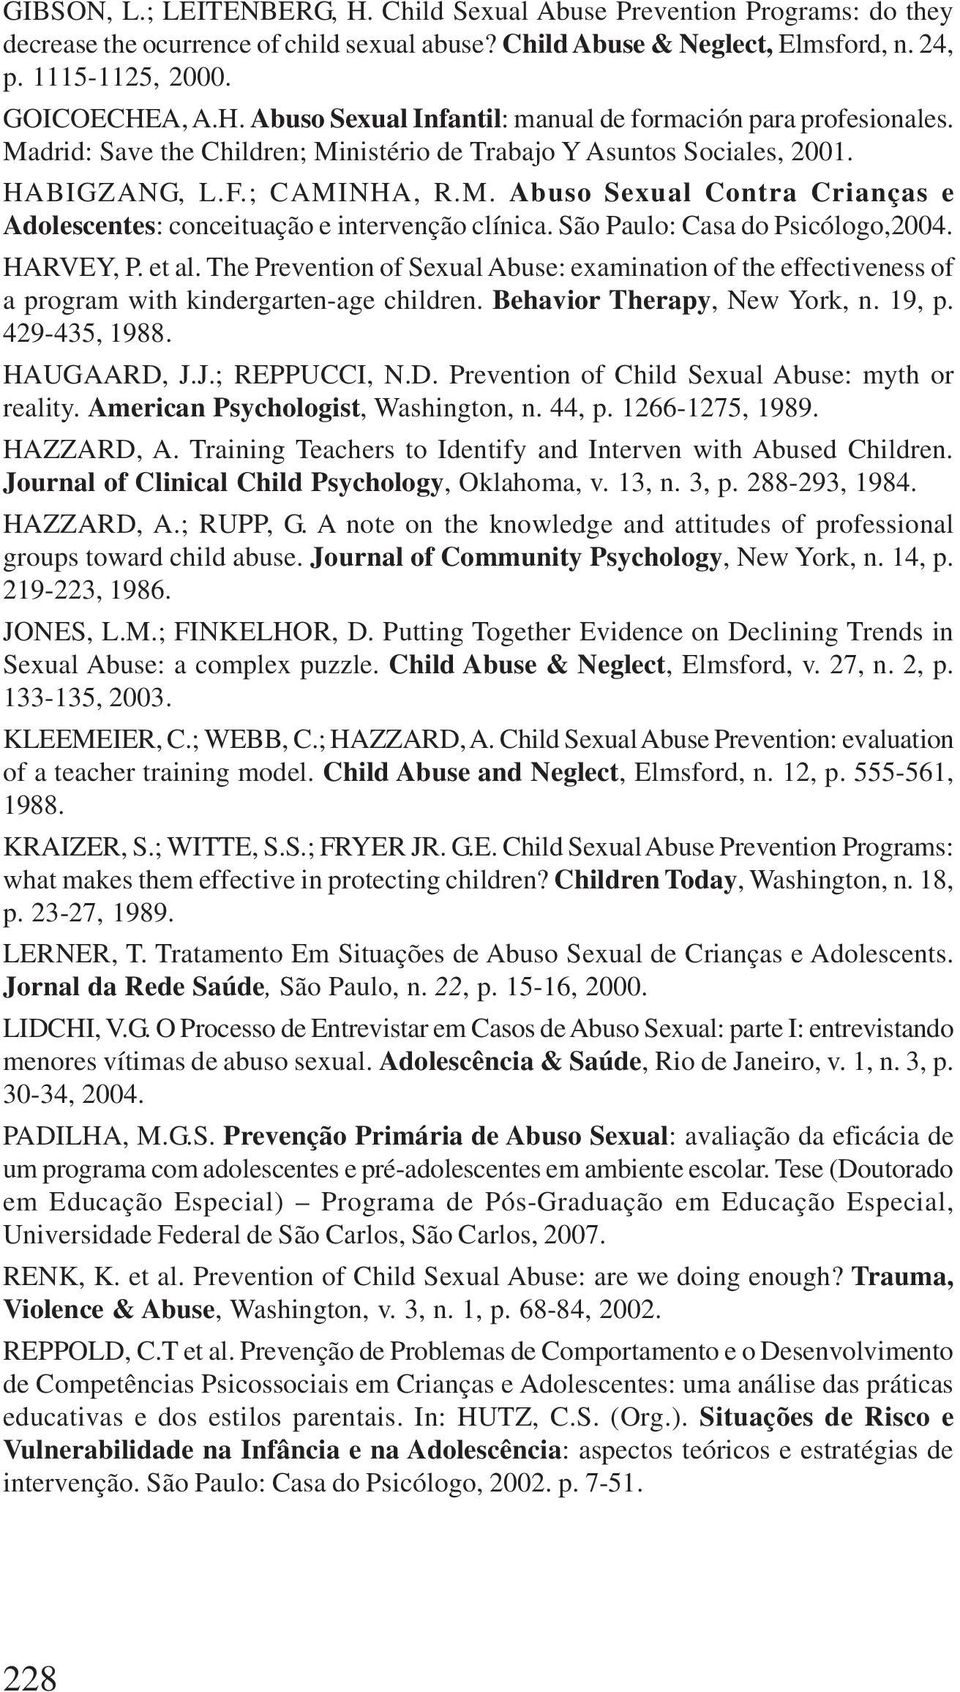 São Paulo: Casa do Psicólogo,2004. HARVEY, P. et al. The Prevention of Sexual Abuse: examination of the effectiveness of a program with kindergarten-age children. Behavior Therapy, New York, n. 19, p.